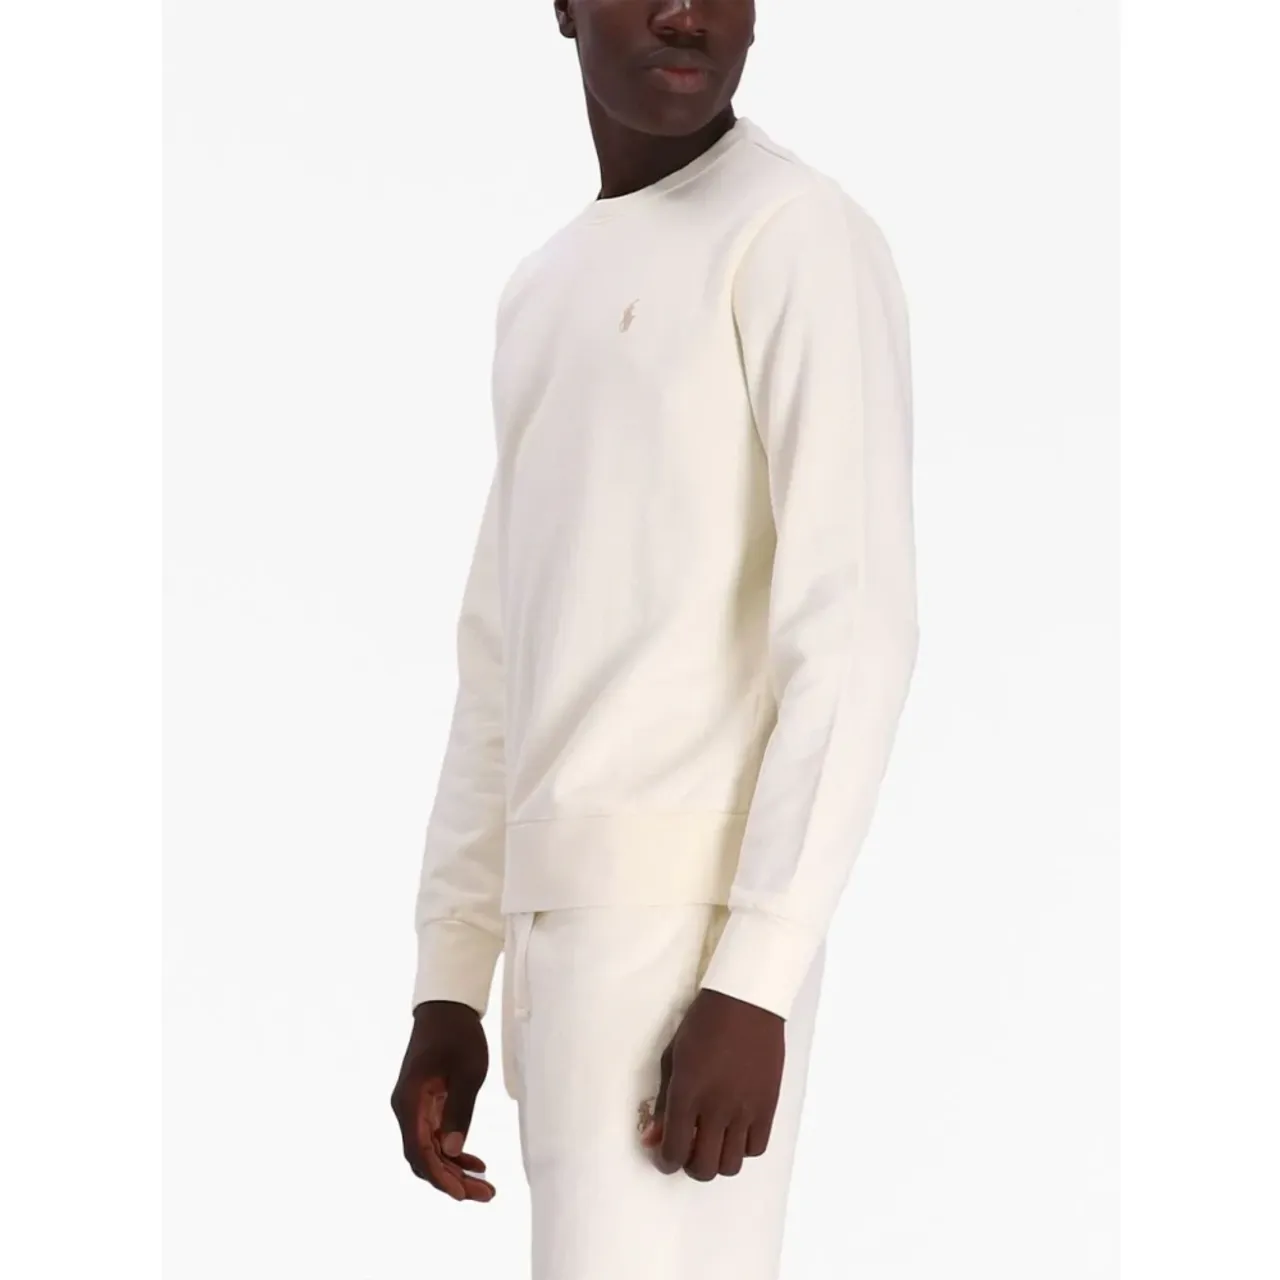 Polo Ralph Lauren , White Sweaters with Signature Pony Embroidery ,White male, Sizes: